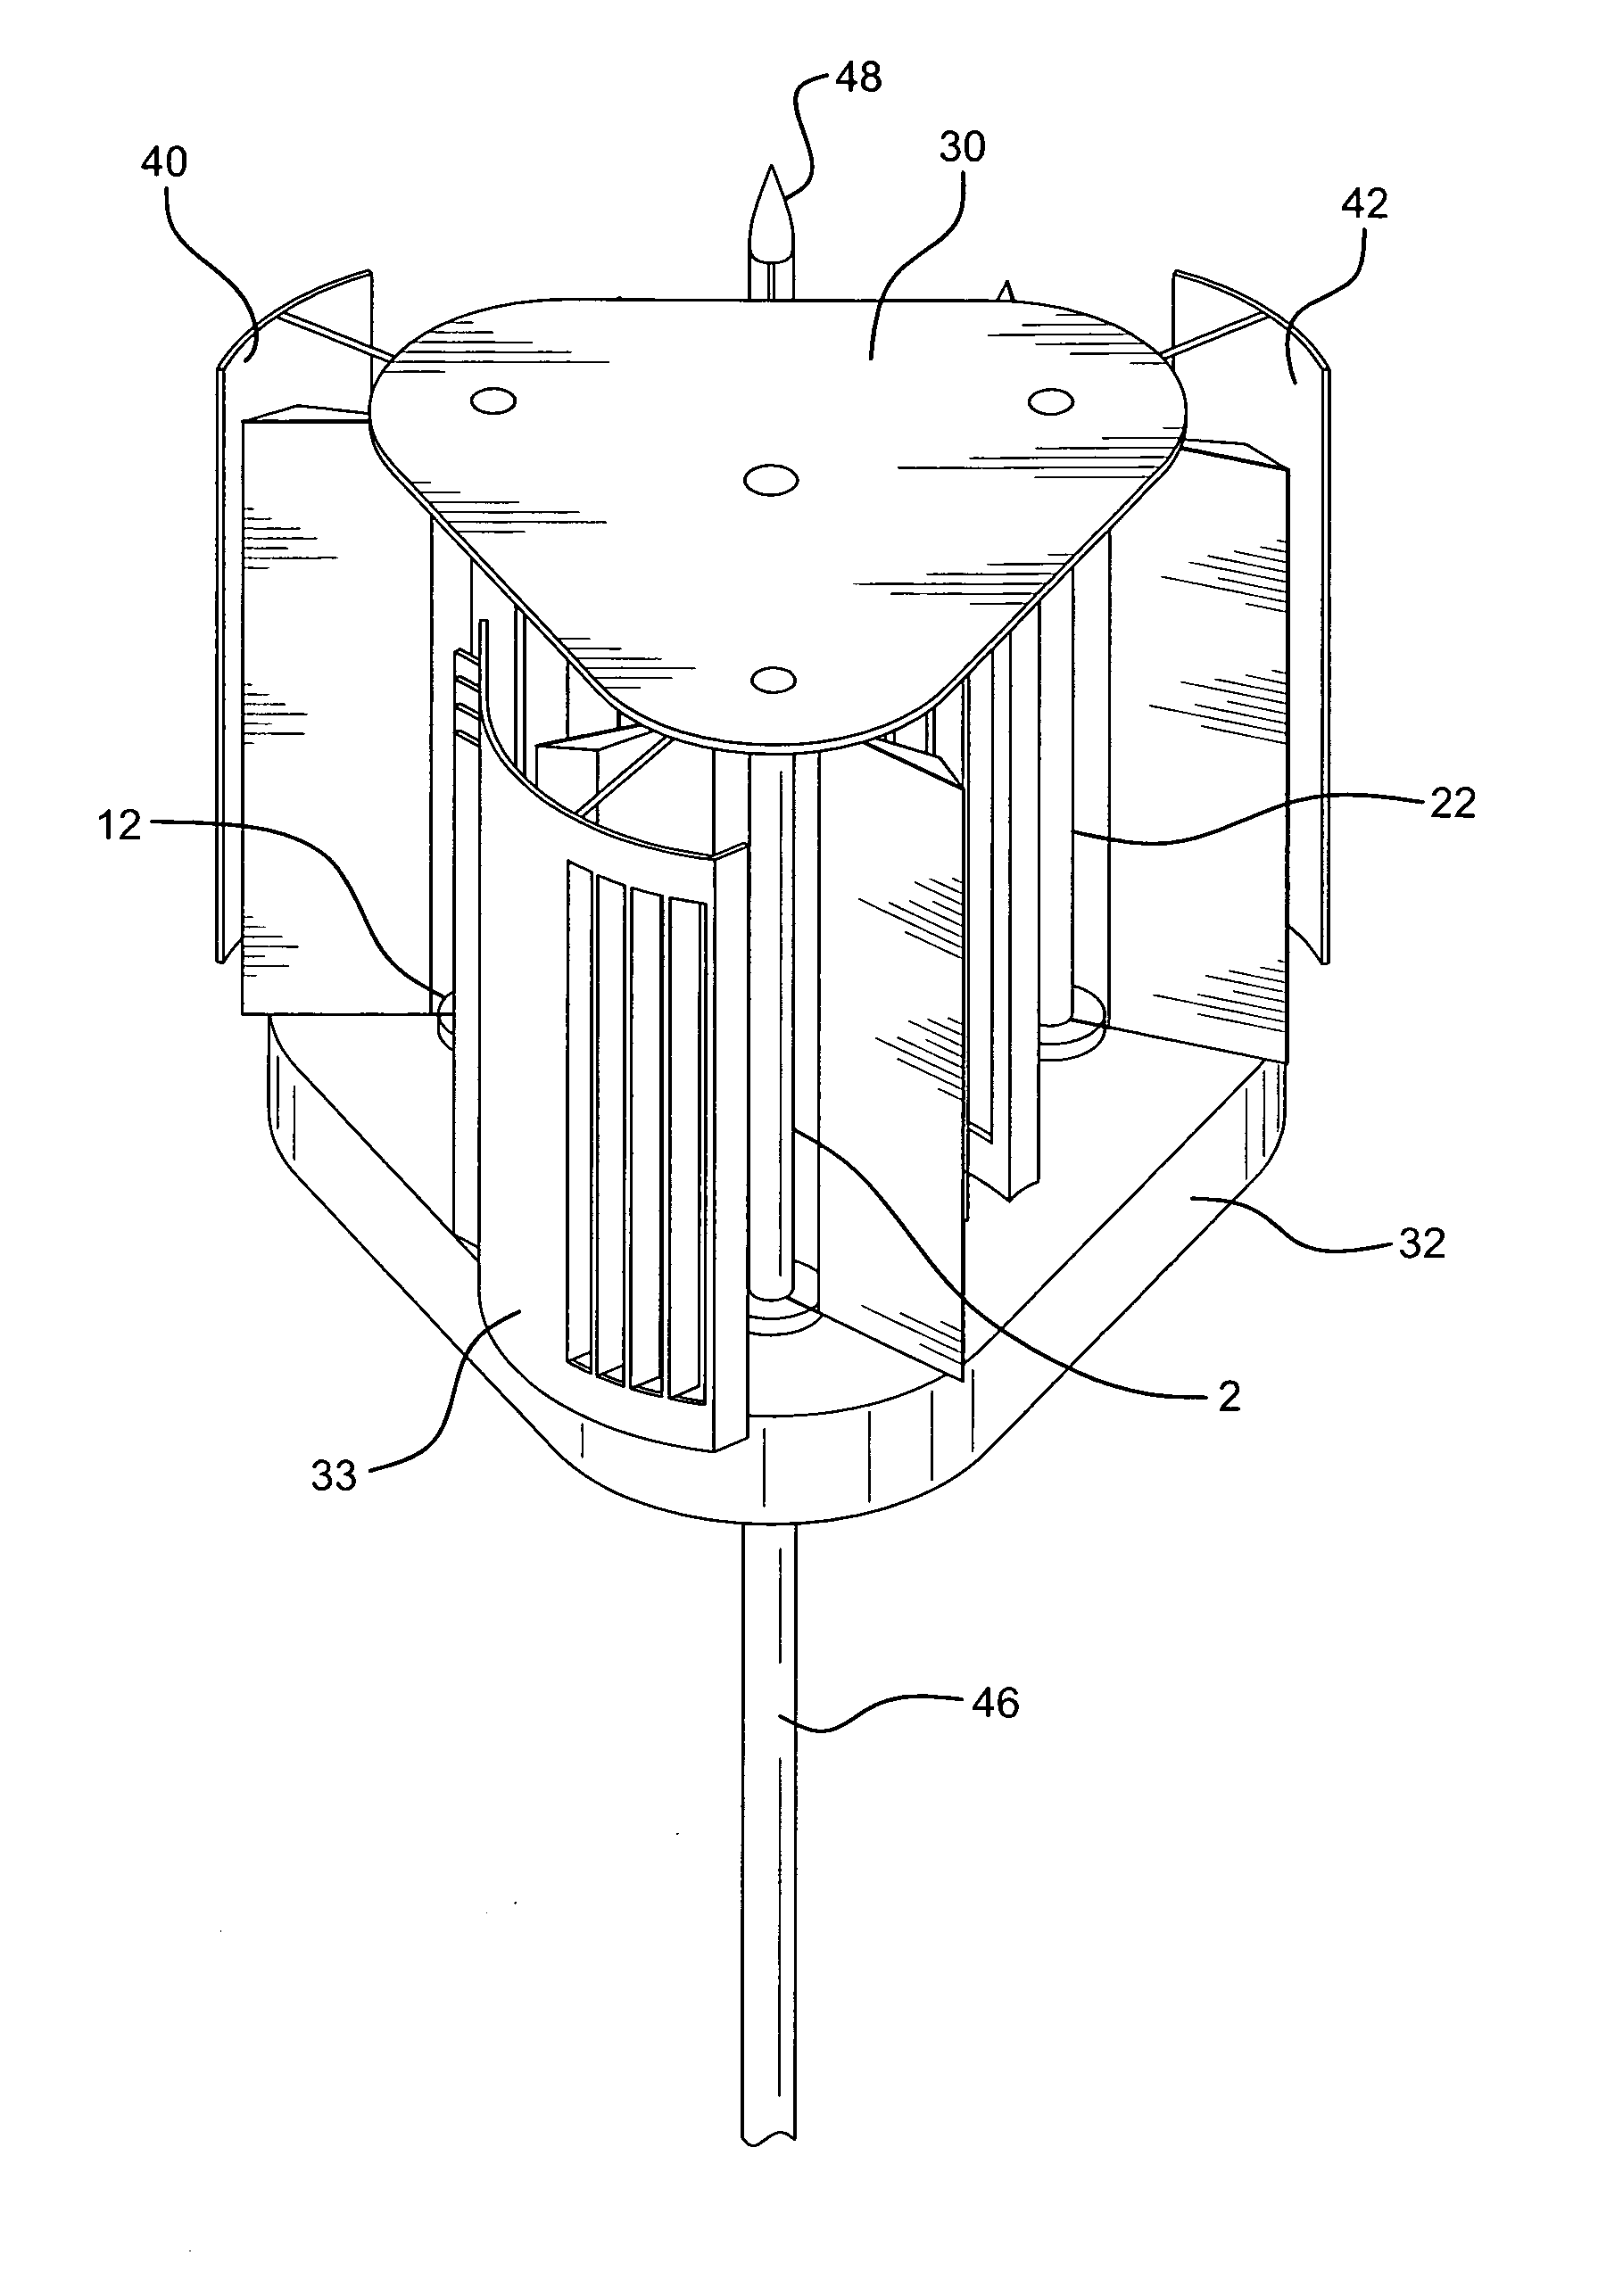 Vertical axis wind turbine system